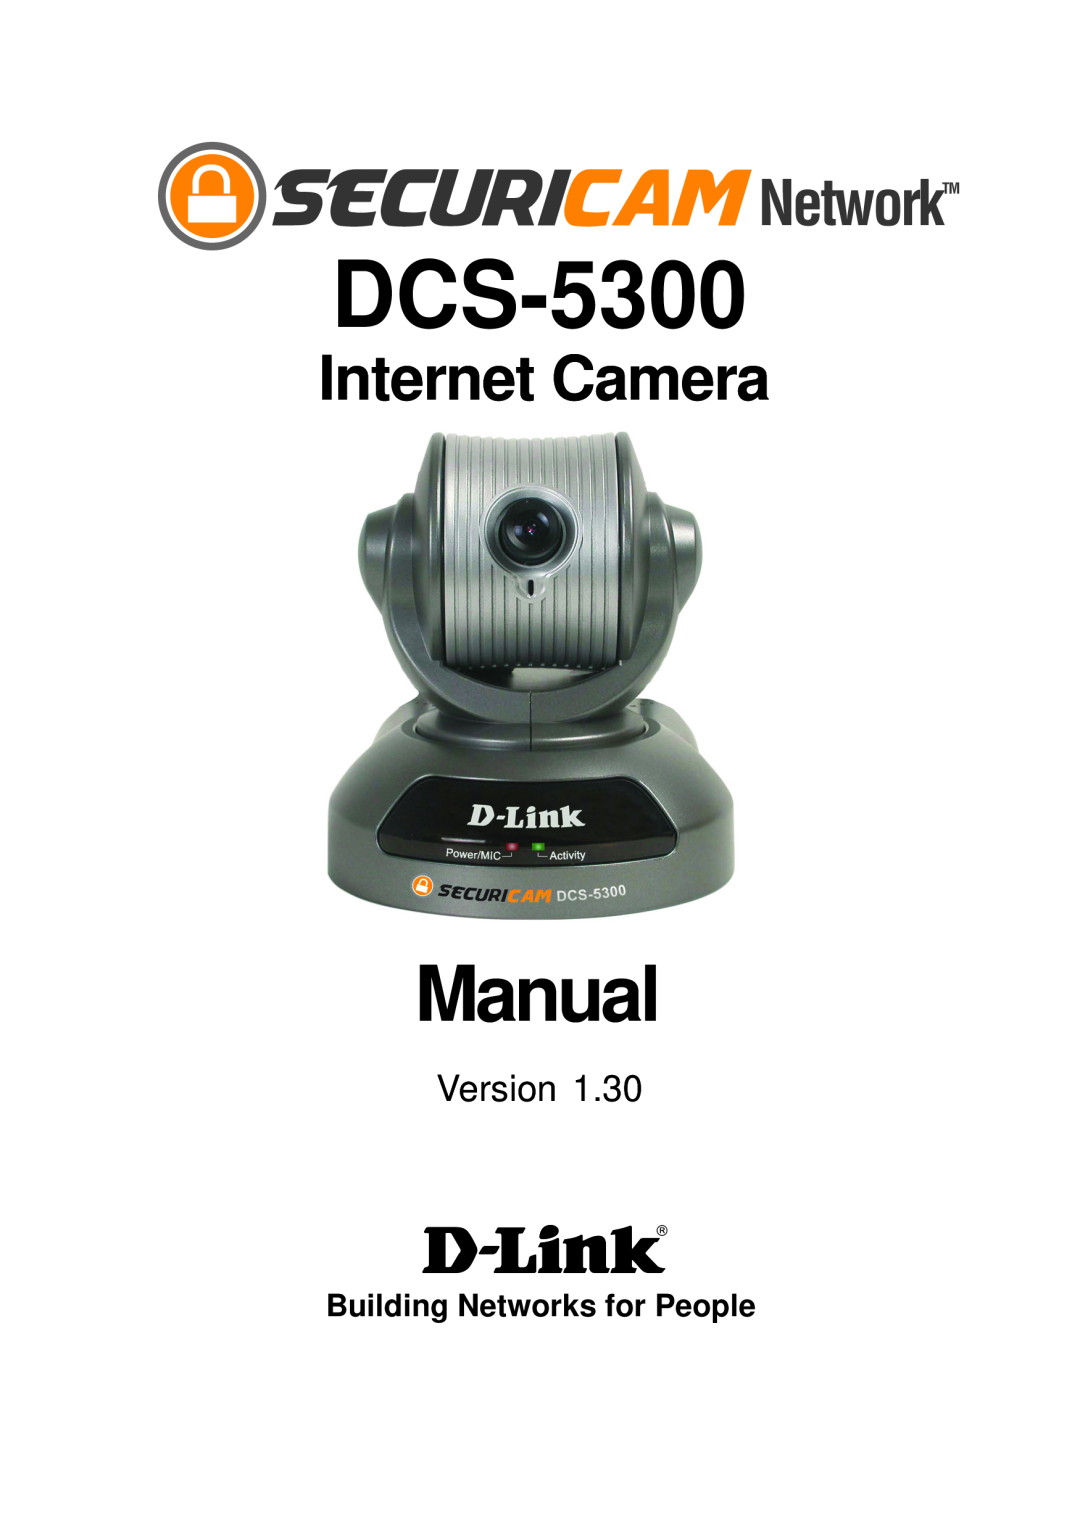 D-Link DCS-5300 manual Building Networks for People, Manual, Internet Camera, Version 